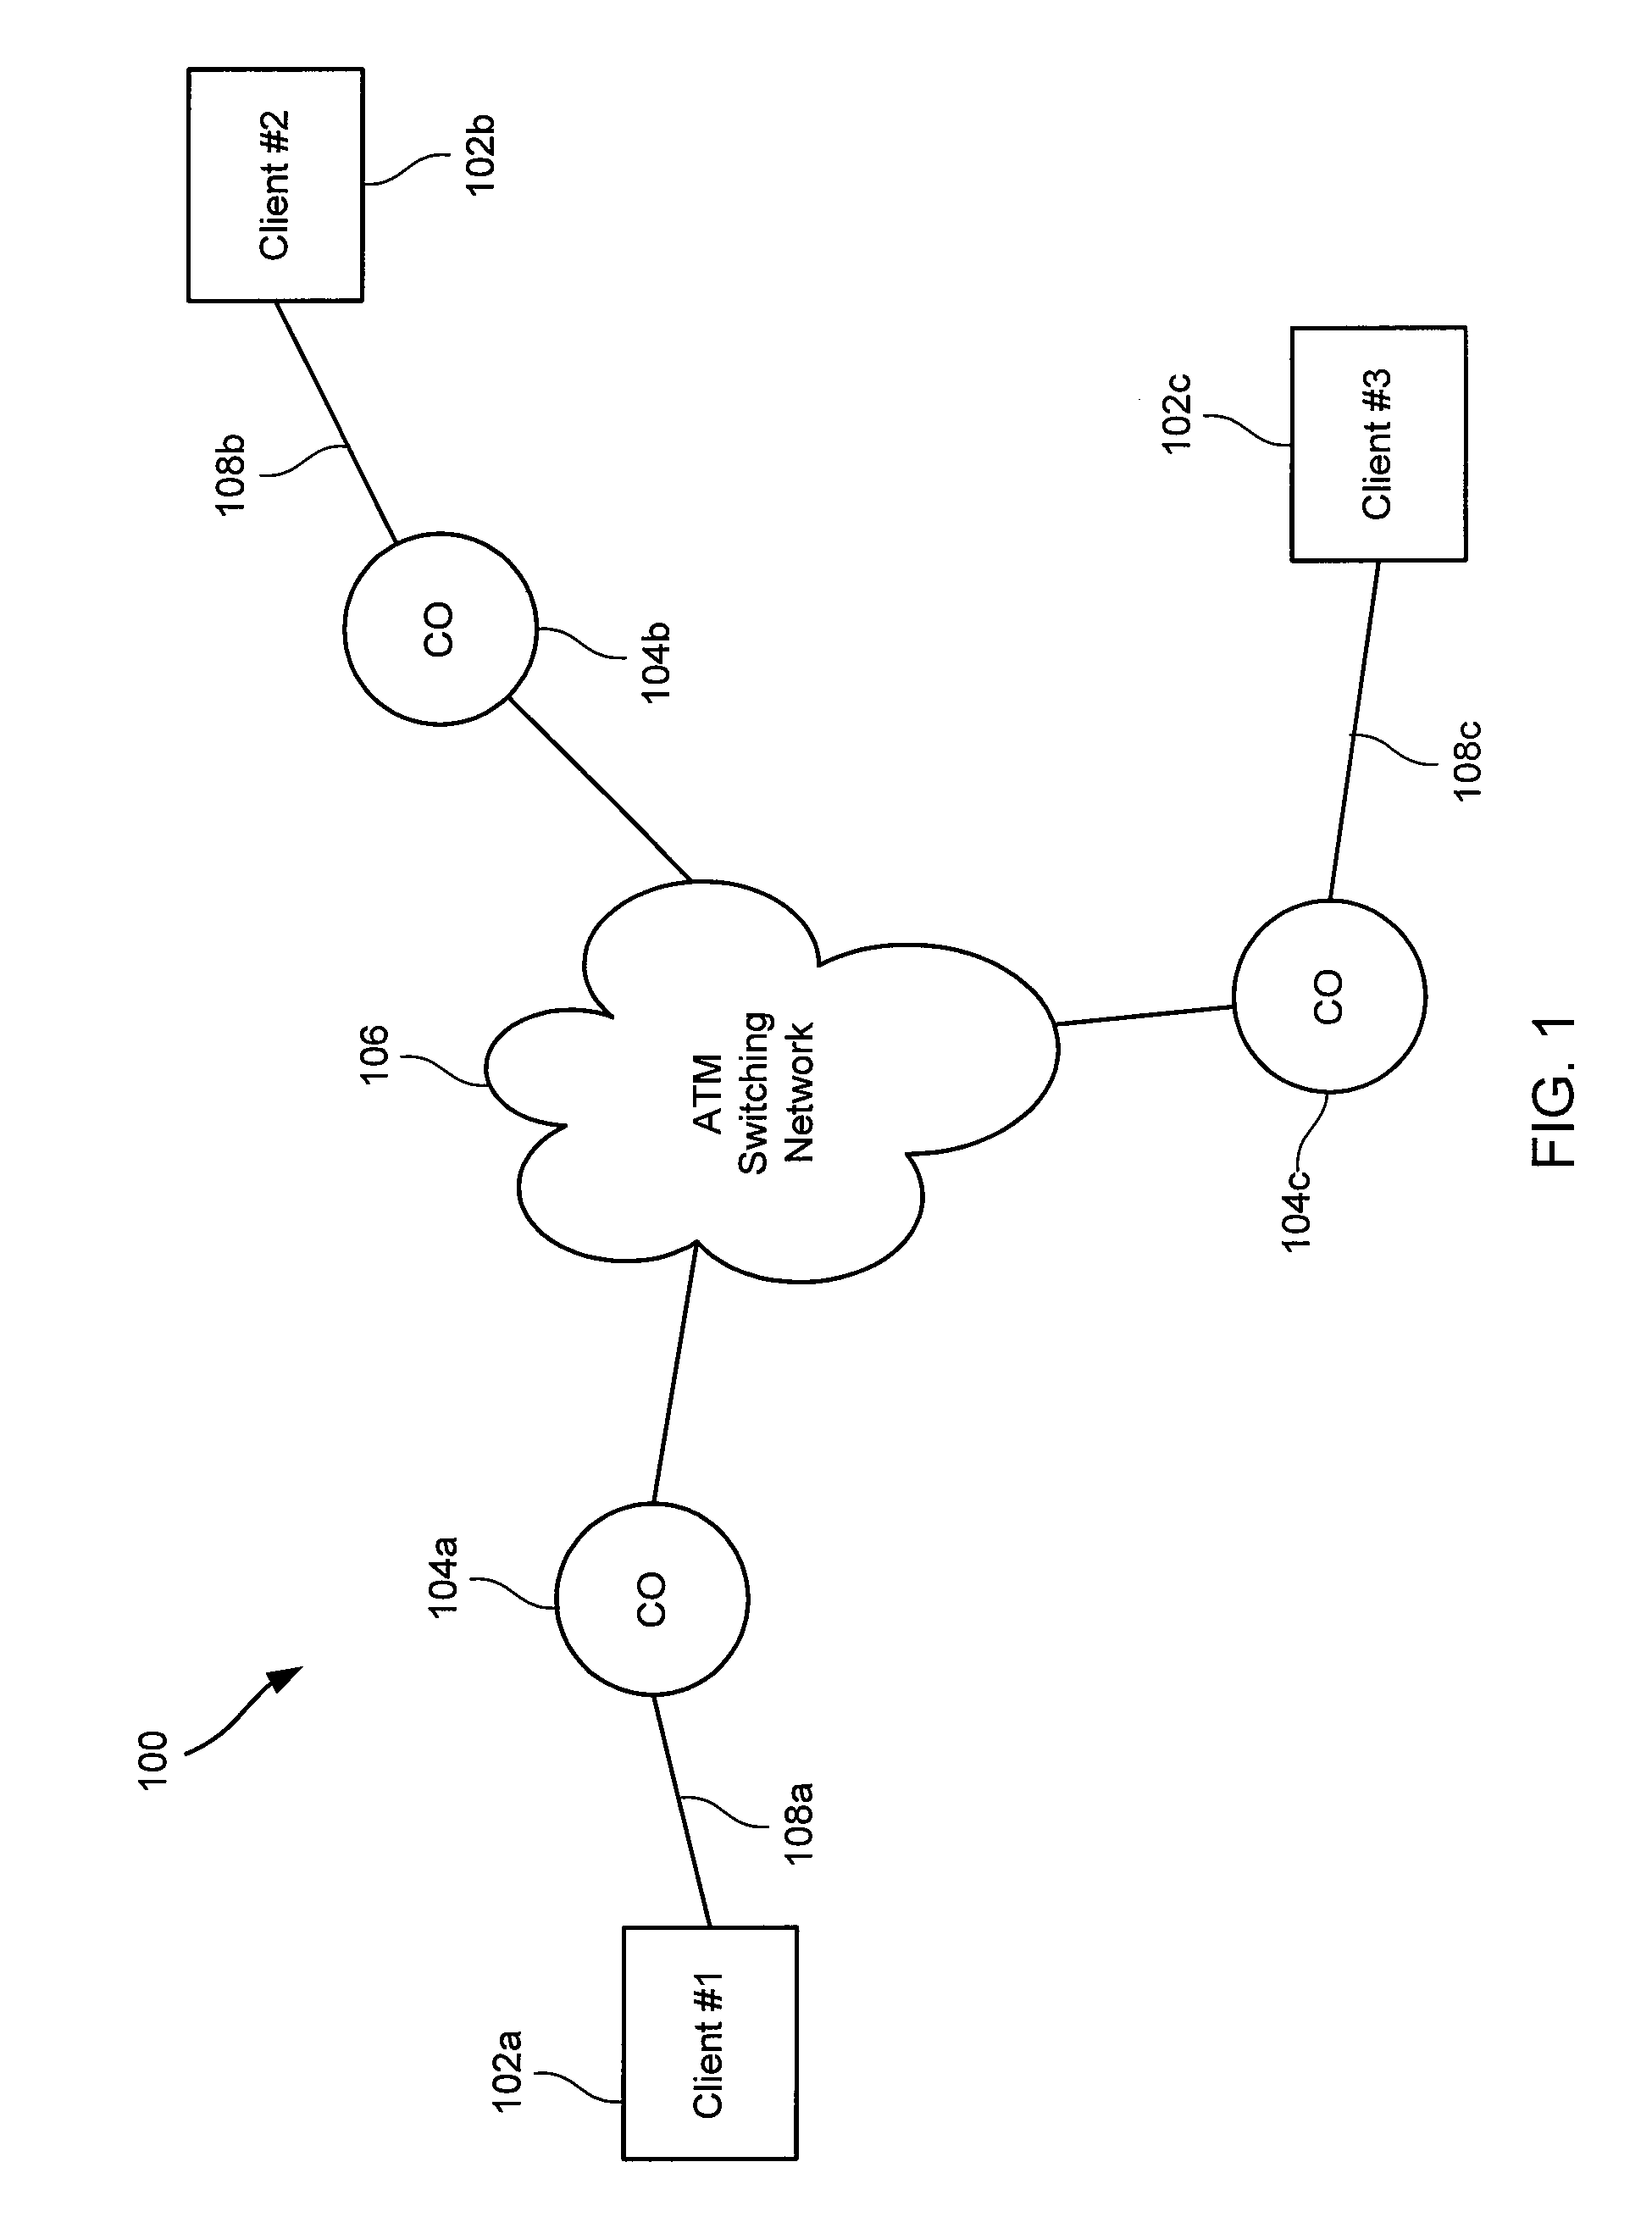 Method and system for providing transport of channelized circuits of arbitrary bit rate through asynchronous transfer mode (ATM) circuit emulation services (CES)